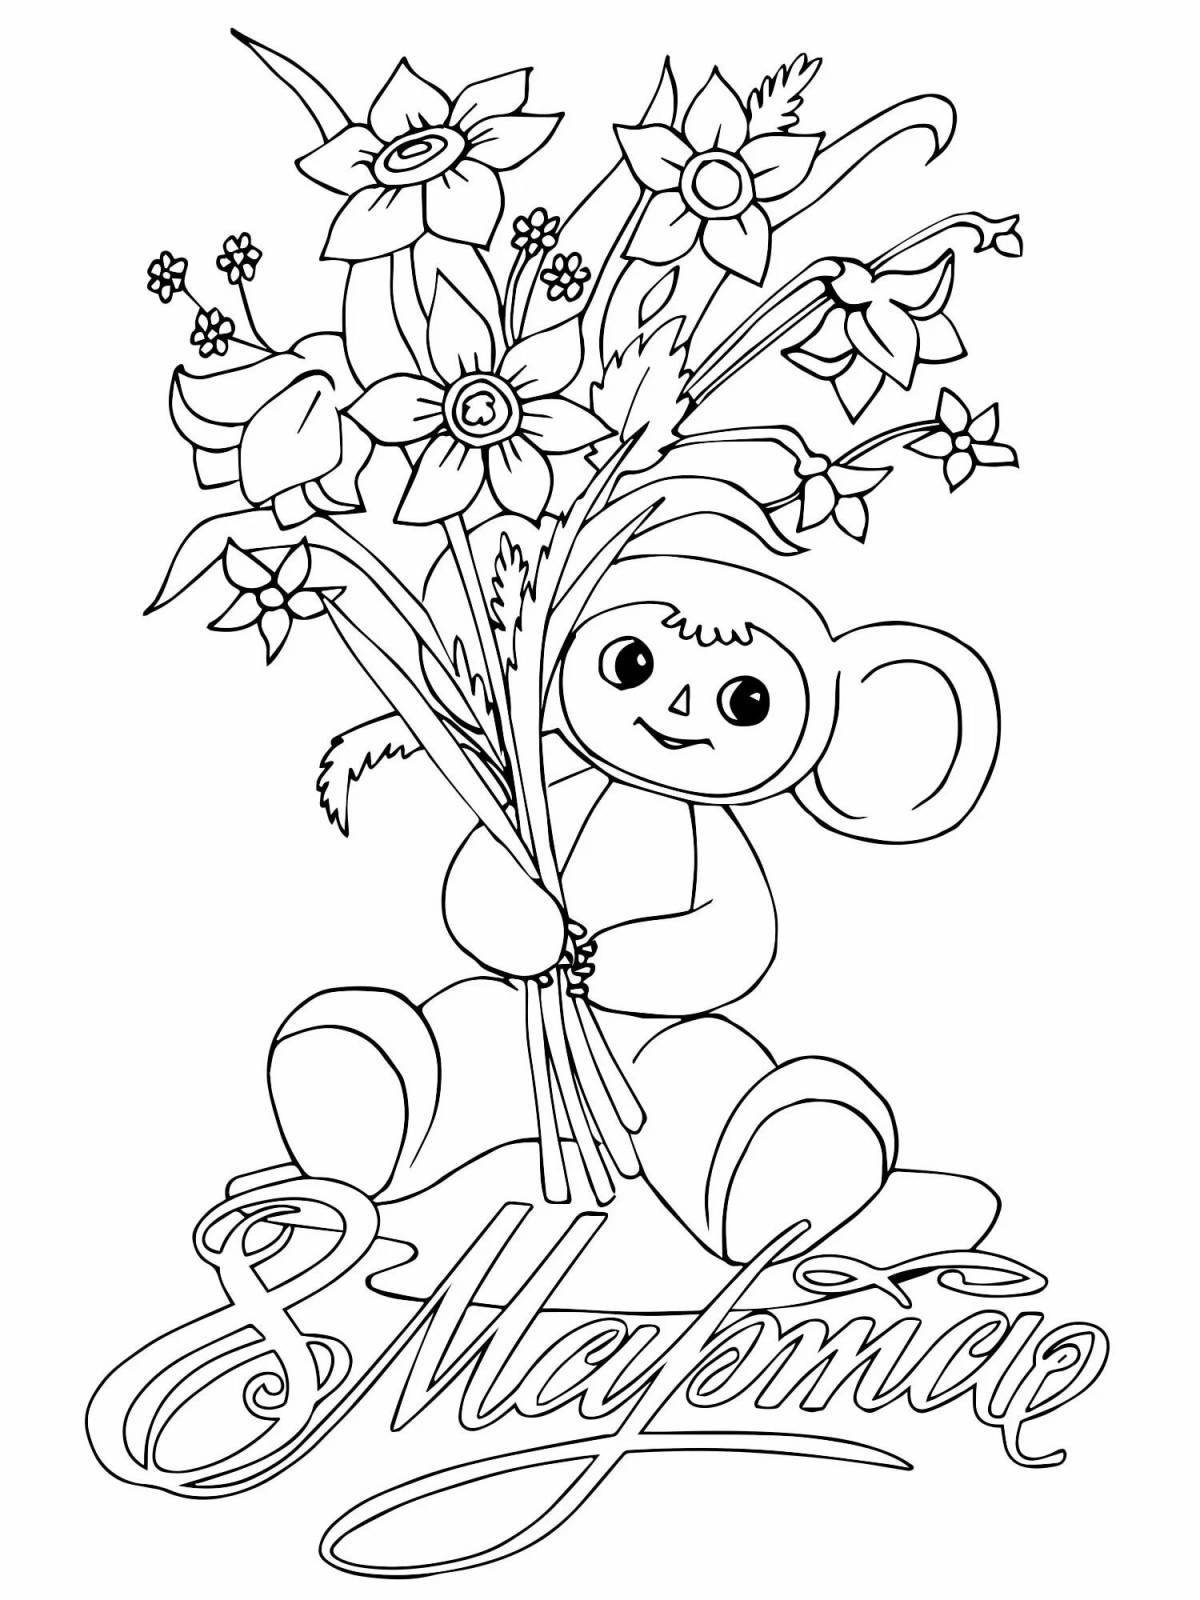 March 8 fun coloring for kids